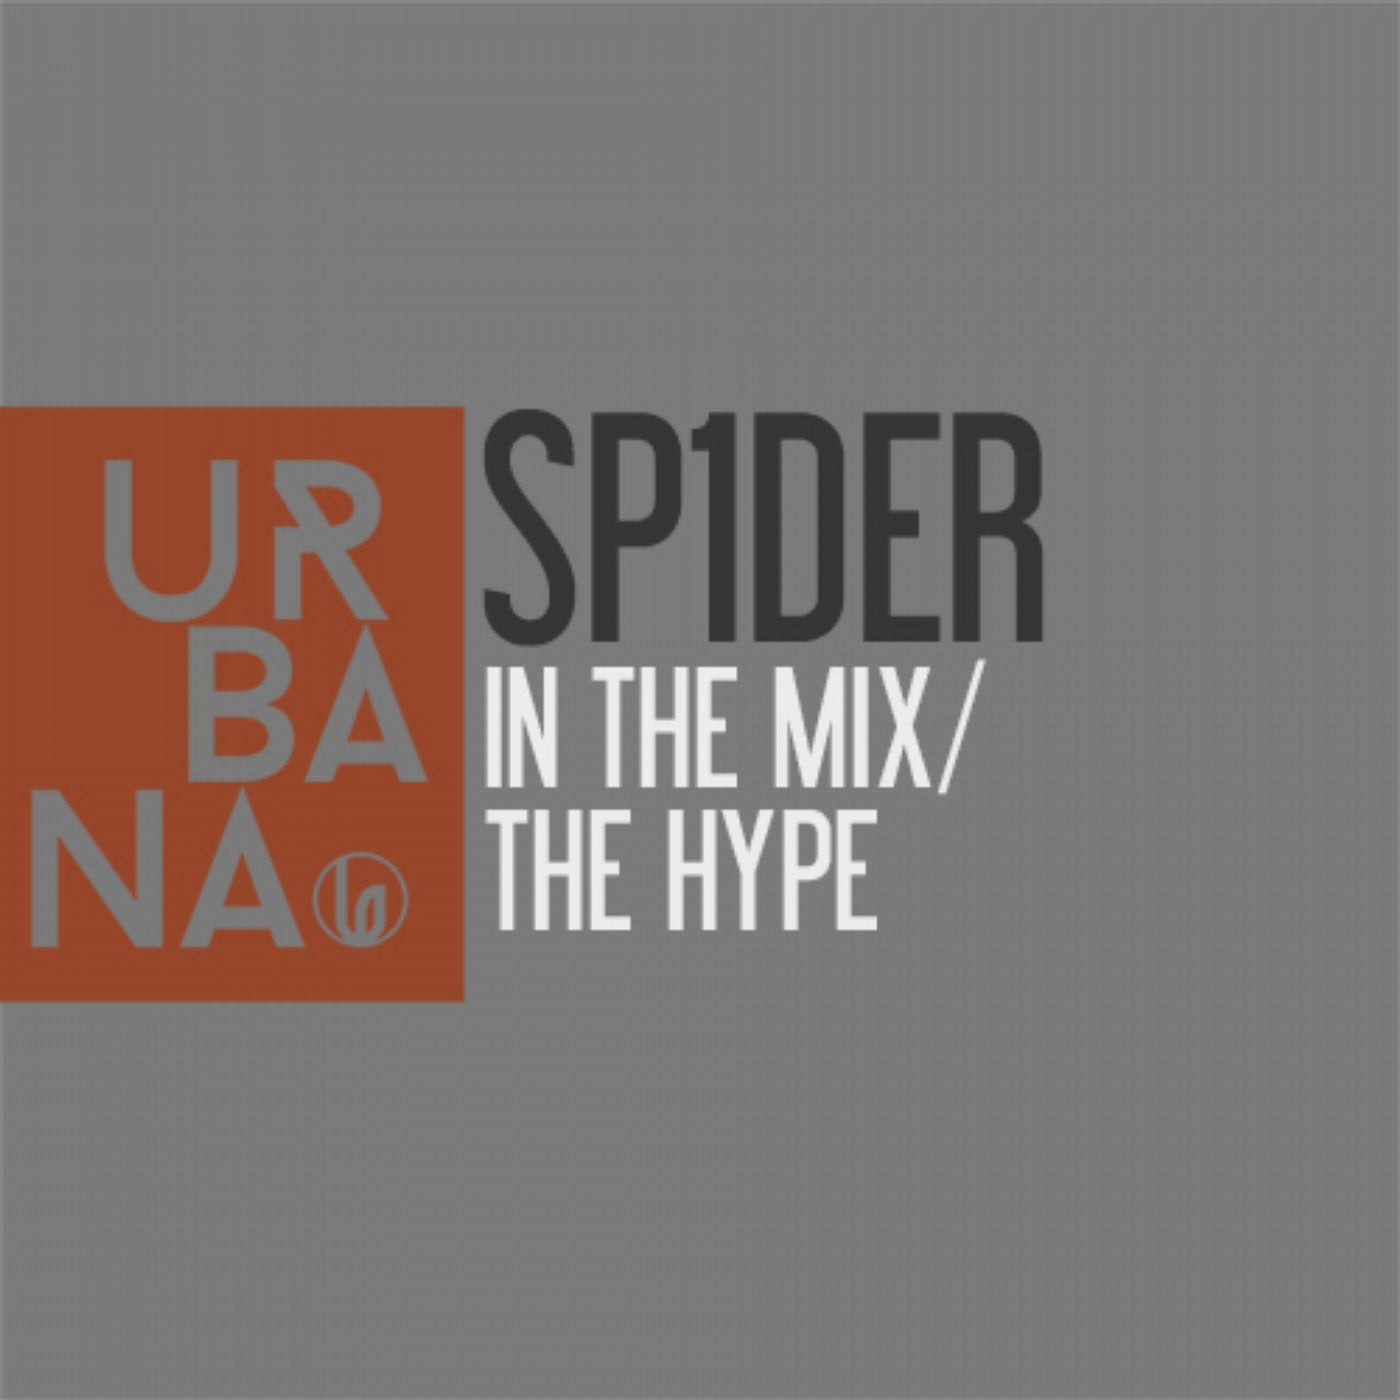 In The Mix / The Hype